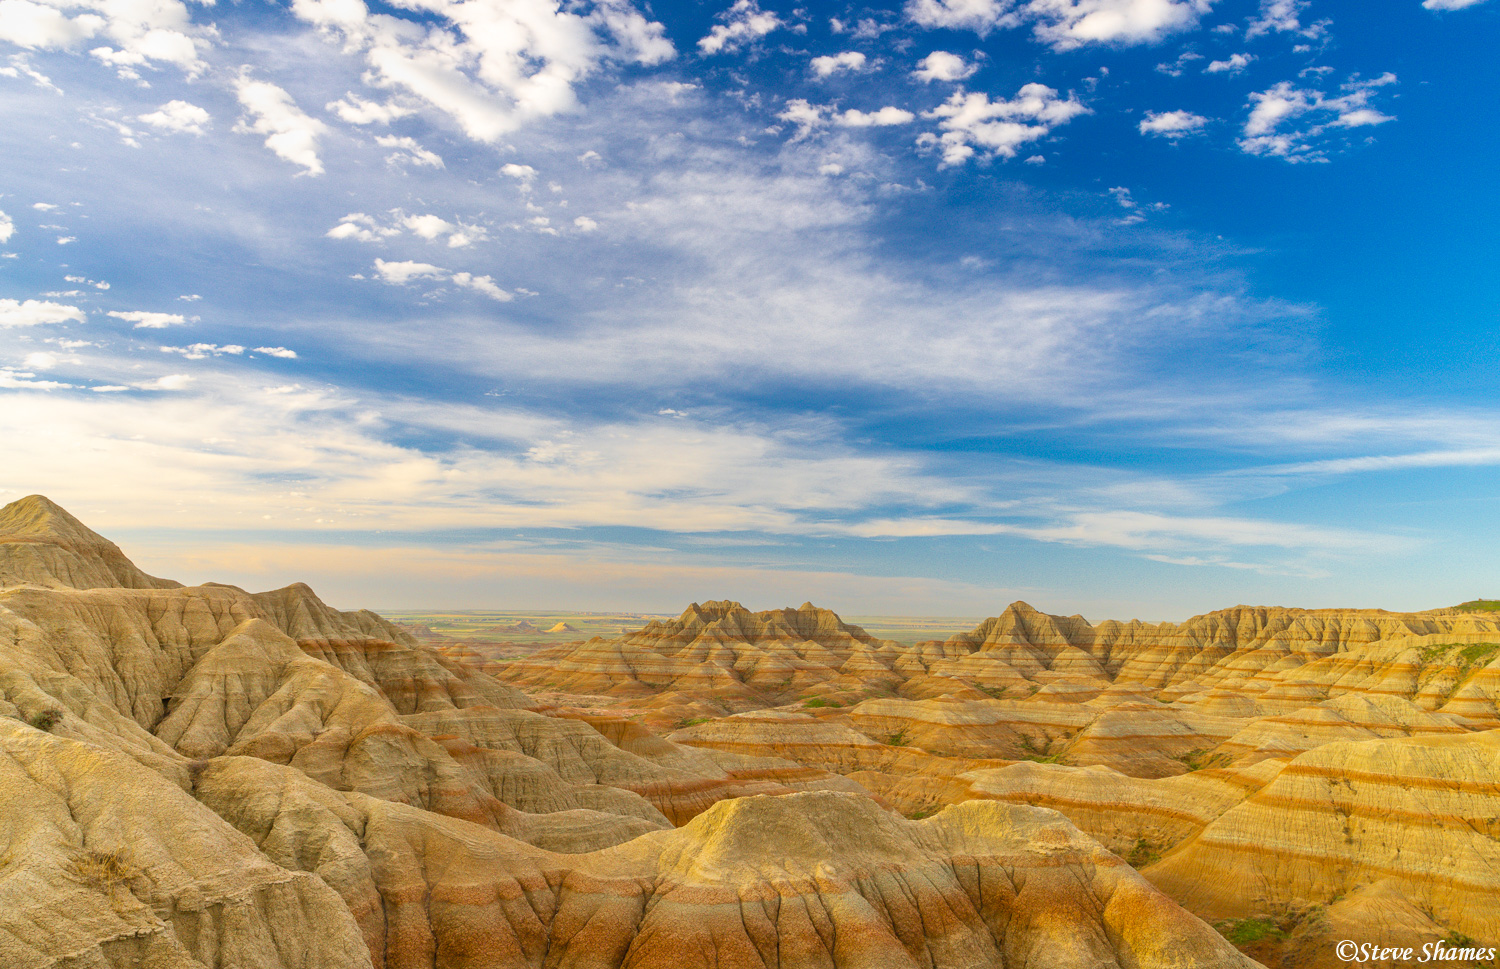 A big beautiful sky over a colorful section of the Badlands.